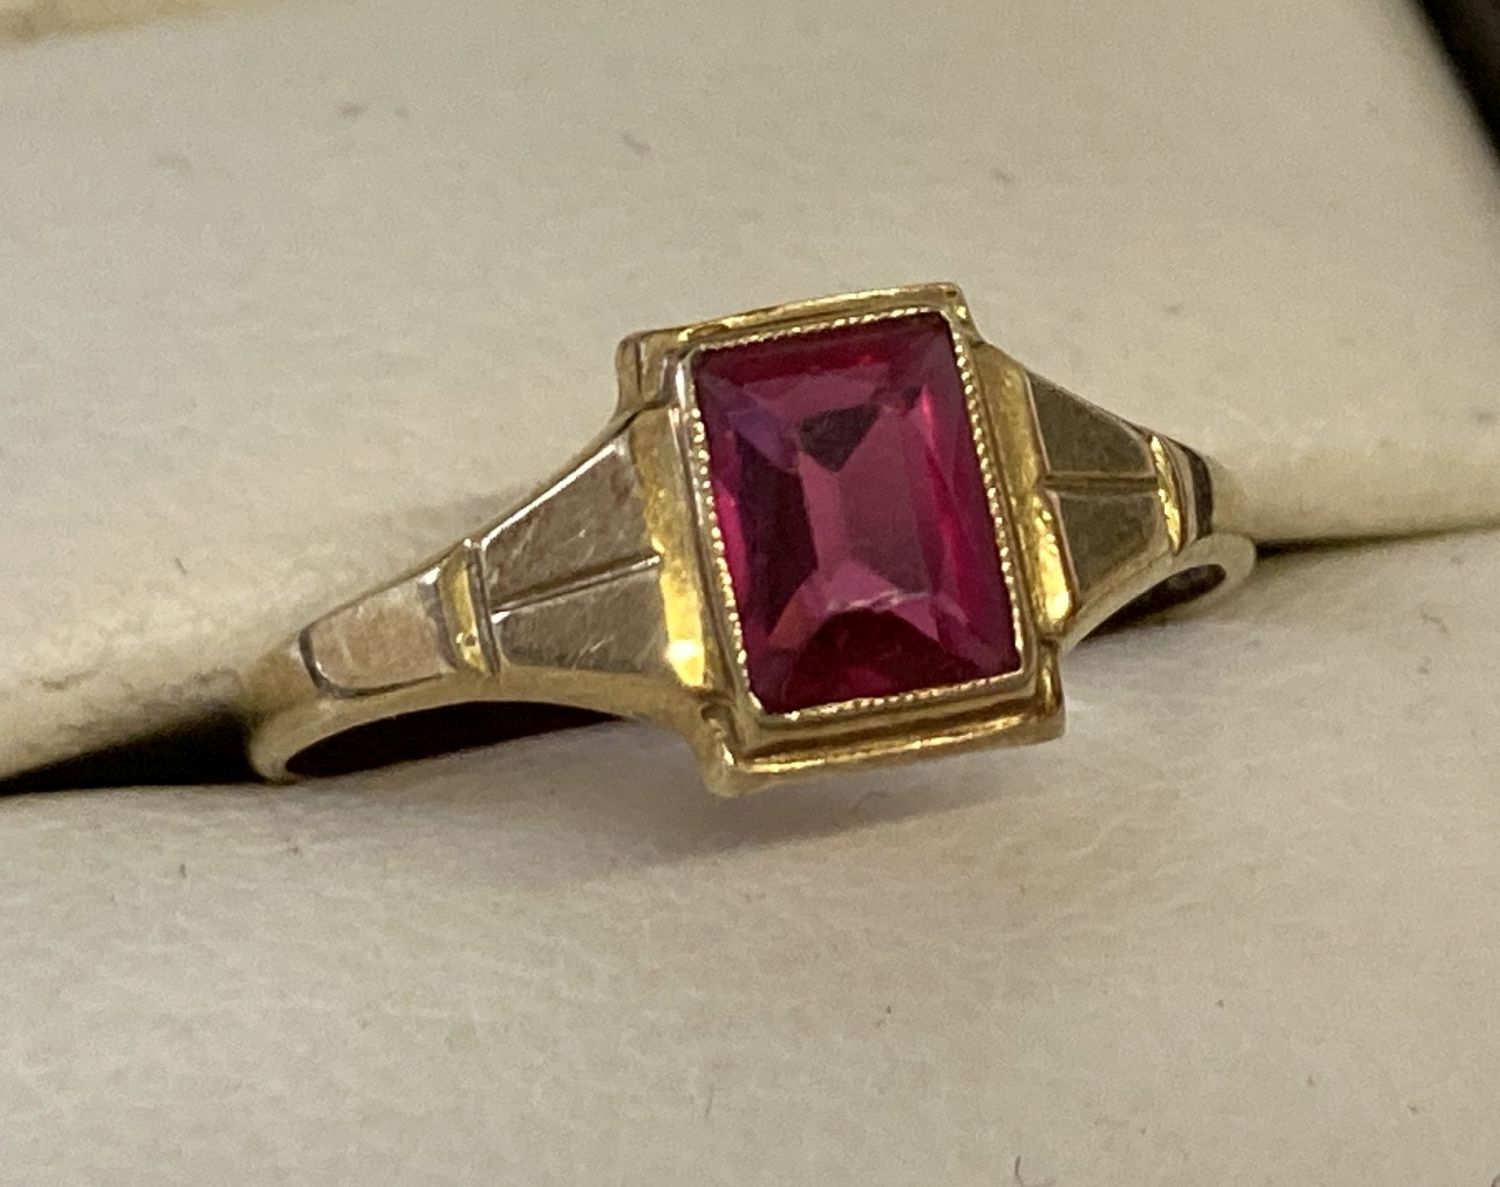 A vintage 18ct gold dress ring set with an emerald cut rubellite stone.